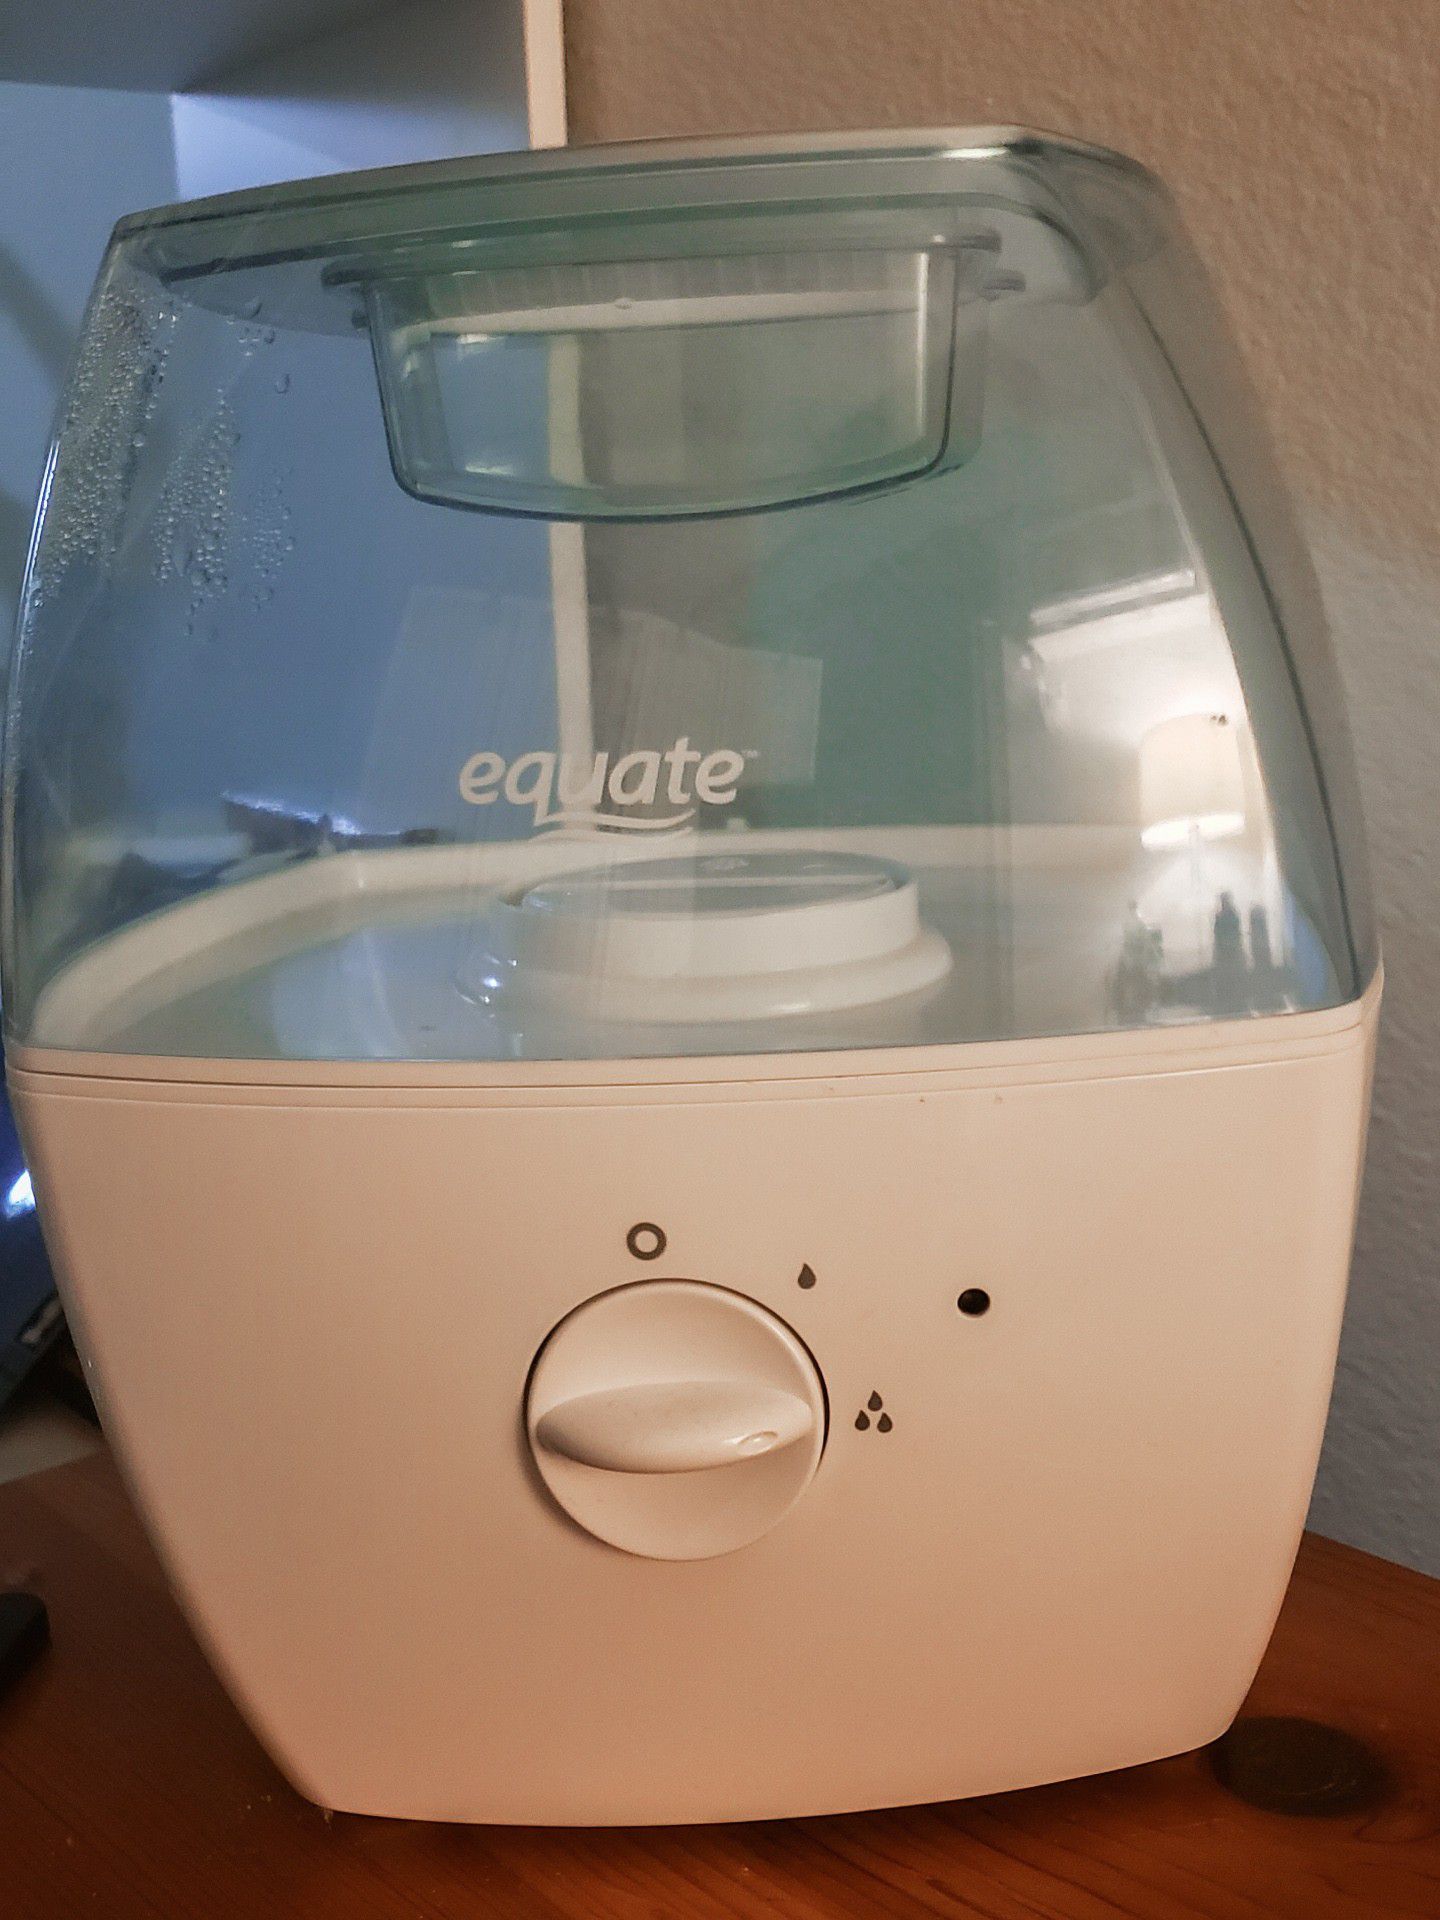 Equate Cool Mist Humidifier